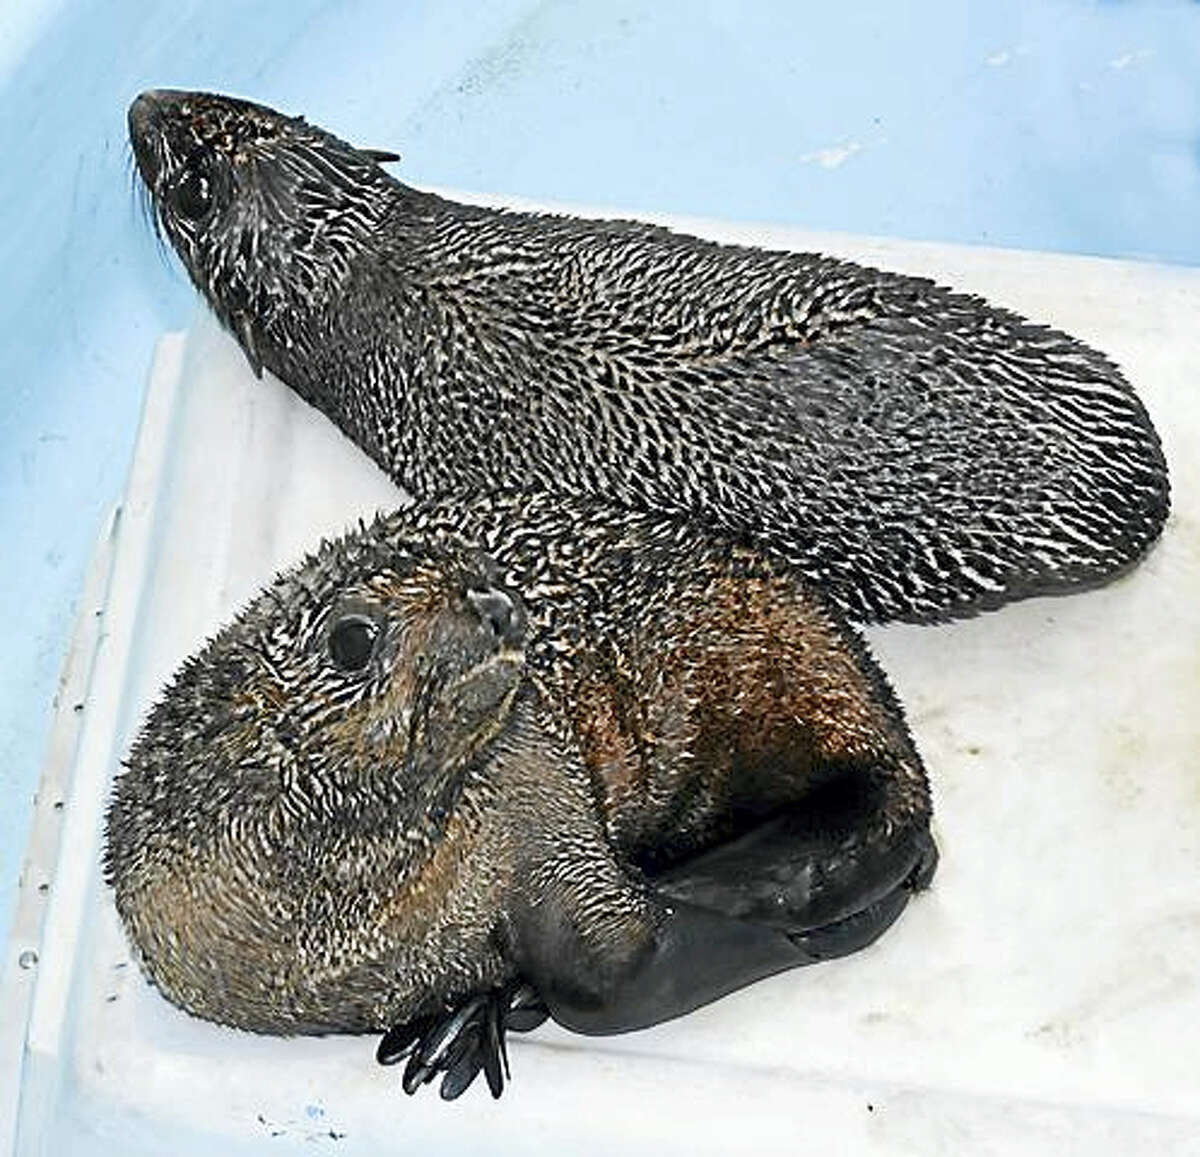 A “dynamic duo” of Northern fur seal pups that arrived at Mystic Aquarium on the evening of Thursday, April 28, 2016. The two are currently being cared for in Mystic Aquarium’s Aquatic Animal Study.